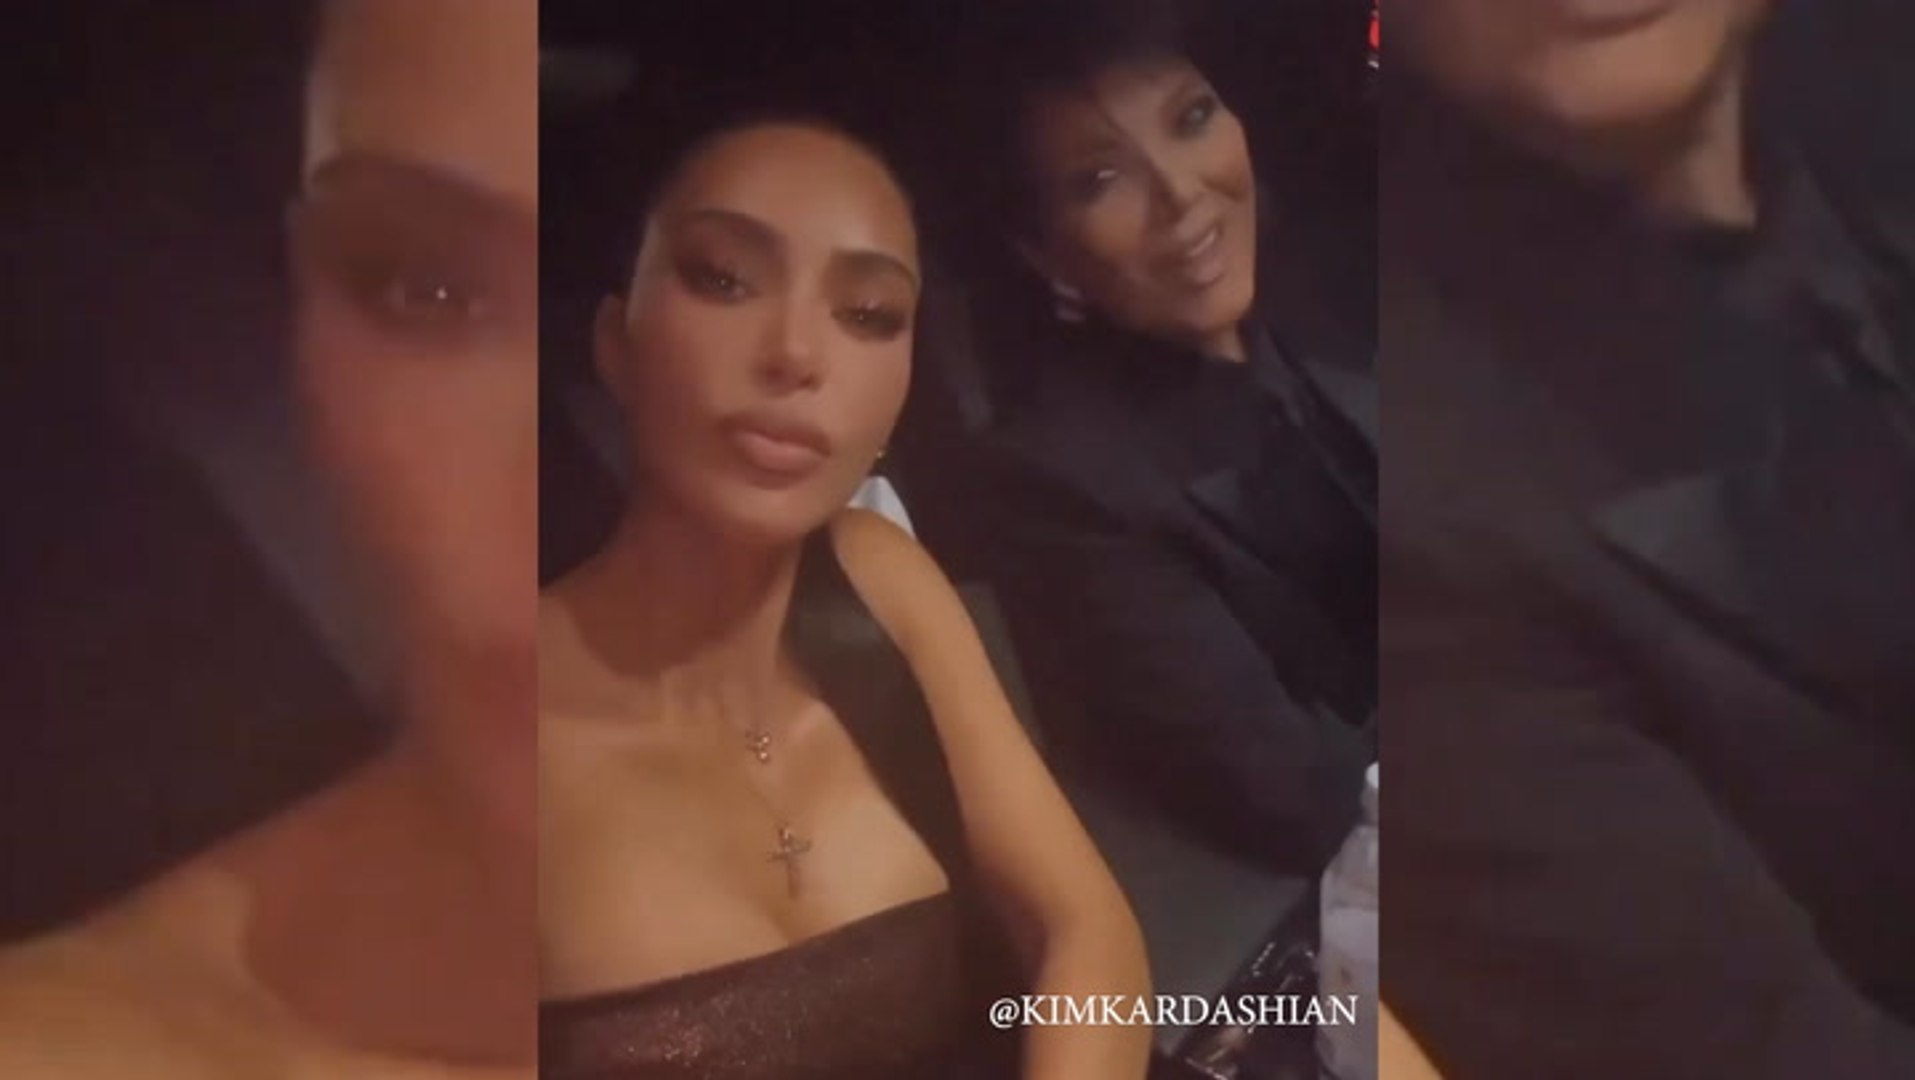 Kim Kardashian reveals her thin face and tiny arms while on 'date night'  with mom Kris Jenner in new video